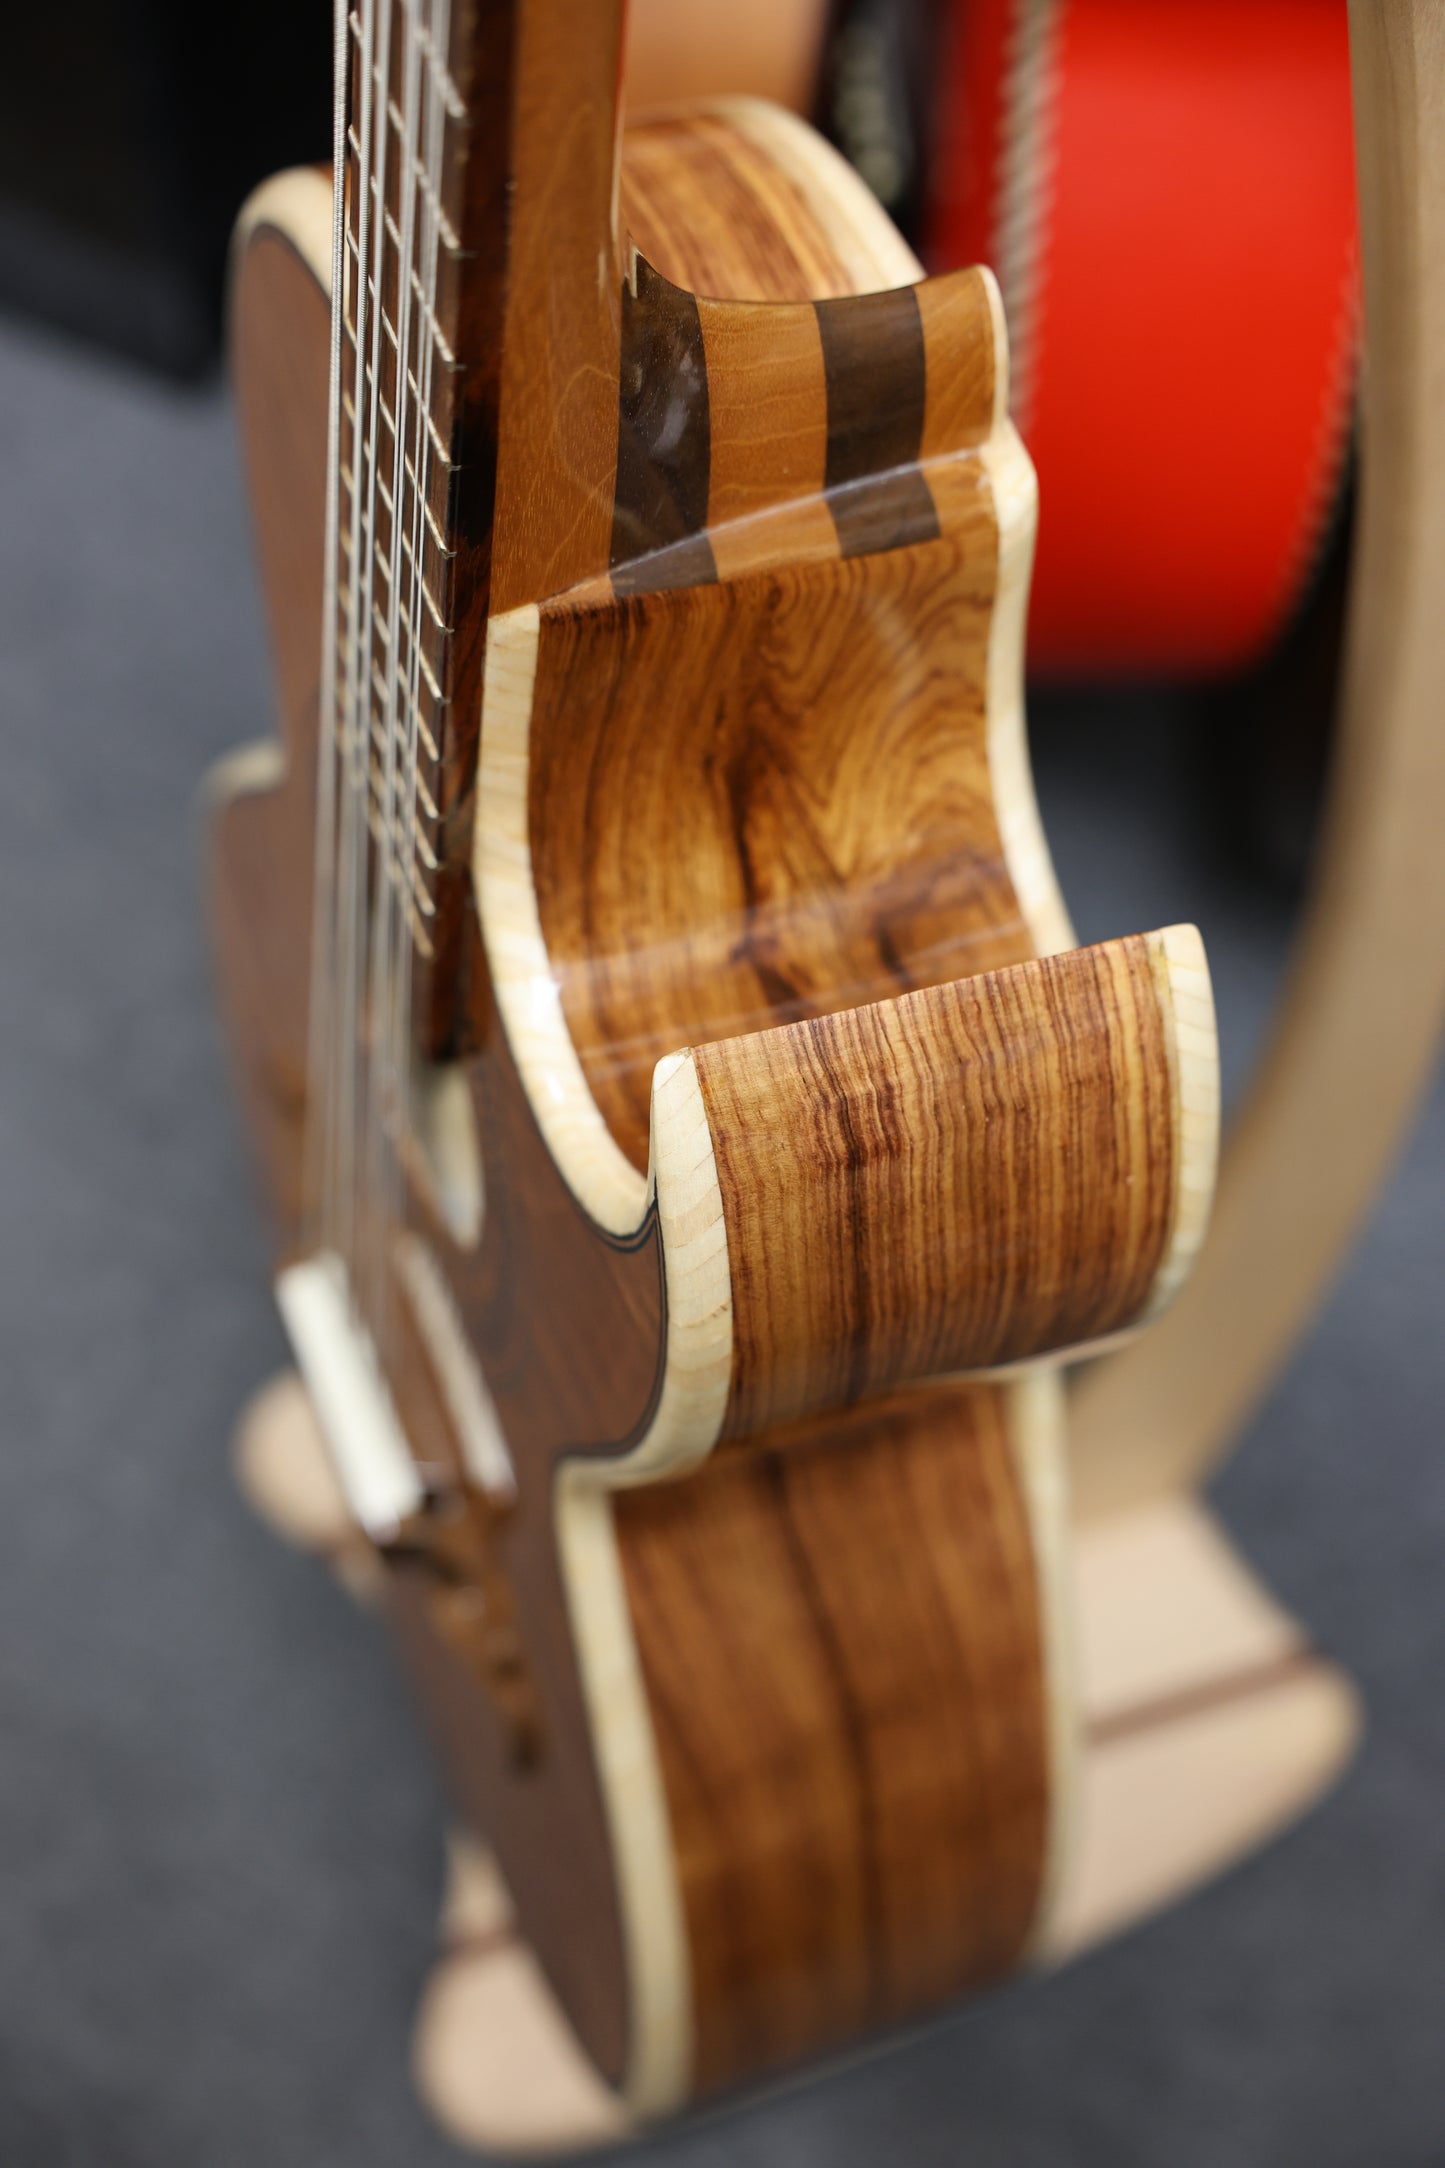 Handcrafted Natural Wood Bajo Quinto - Glossy Finish (Paracho)